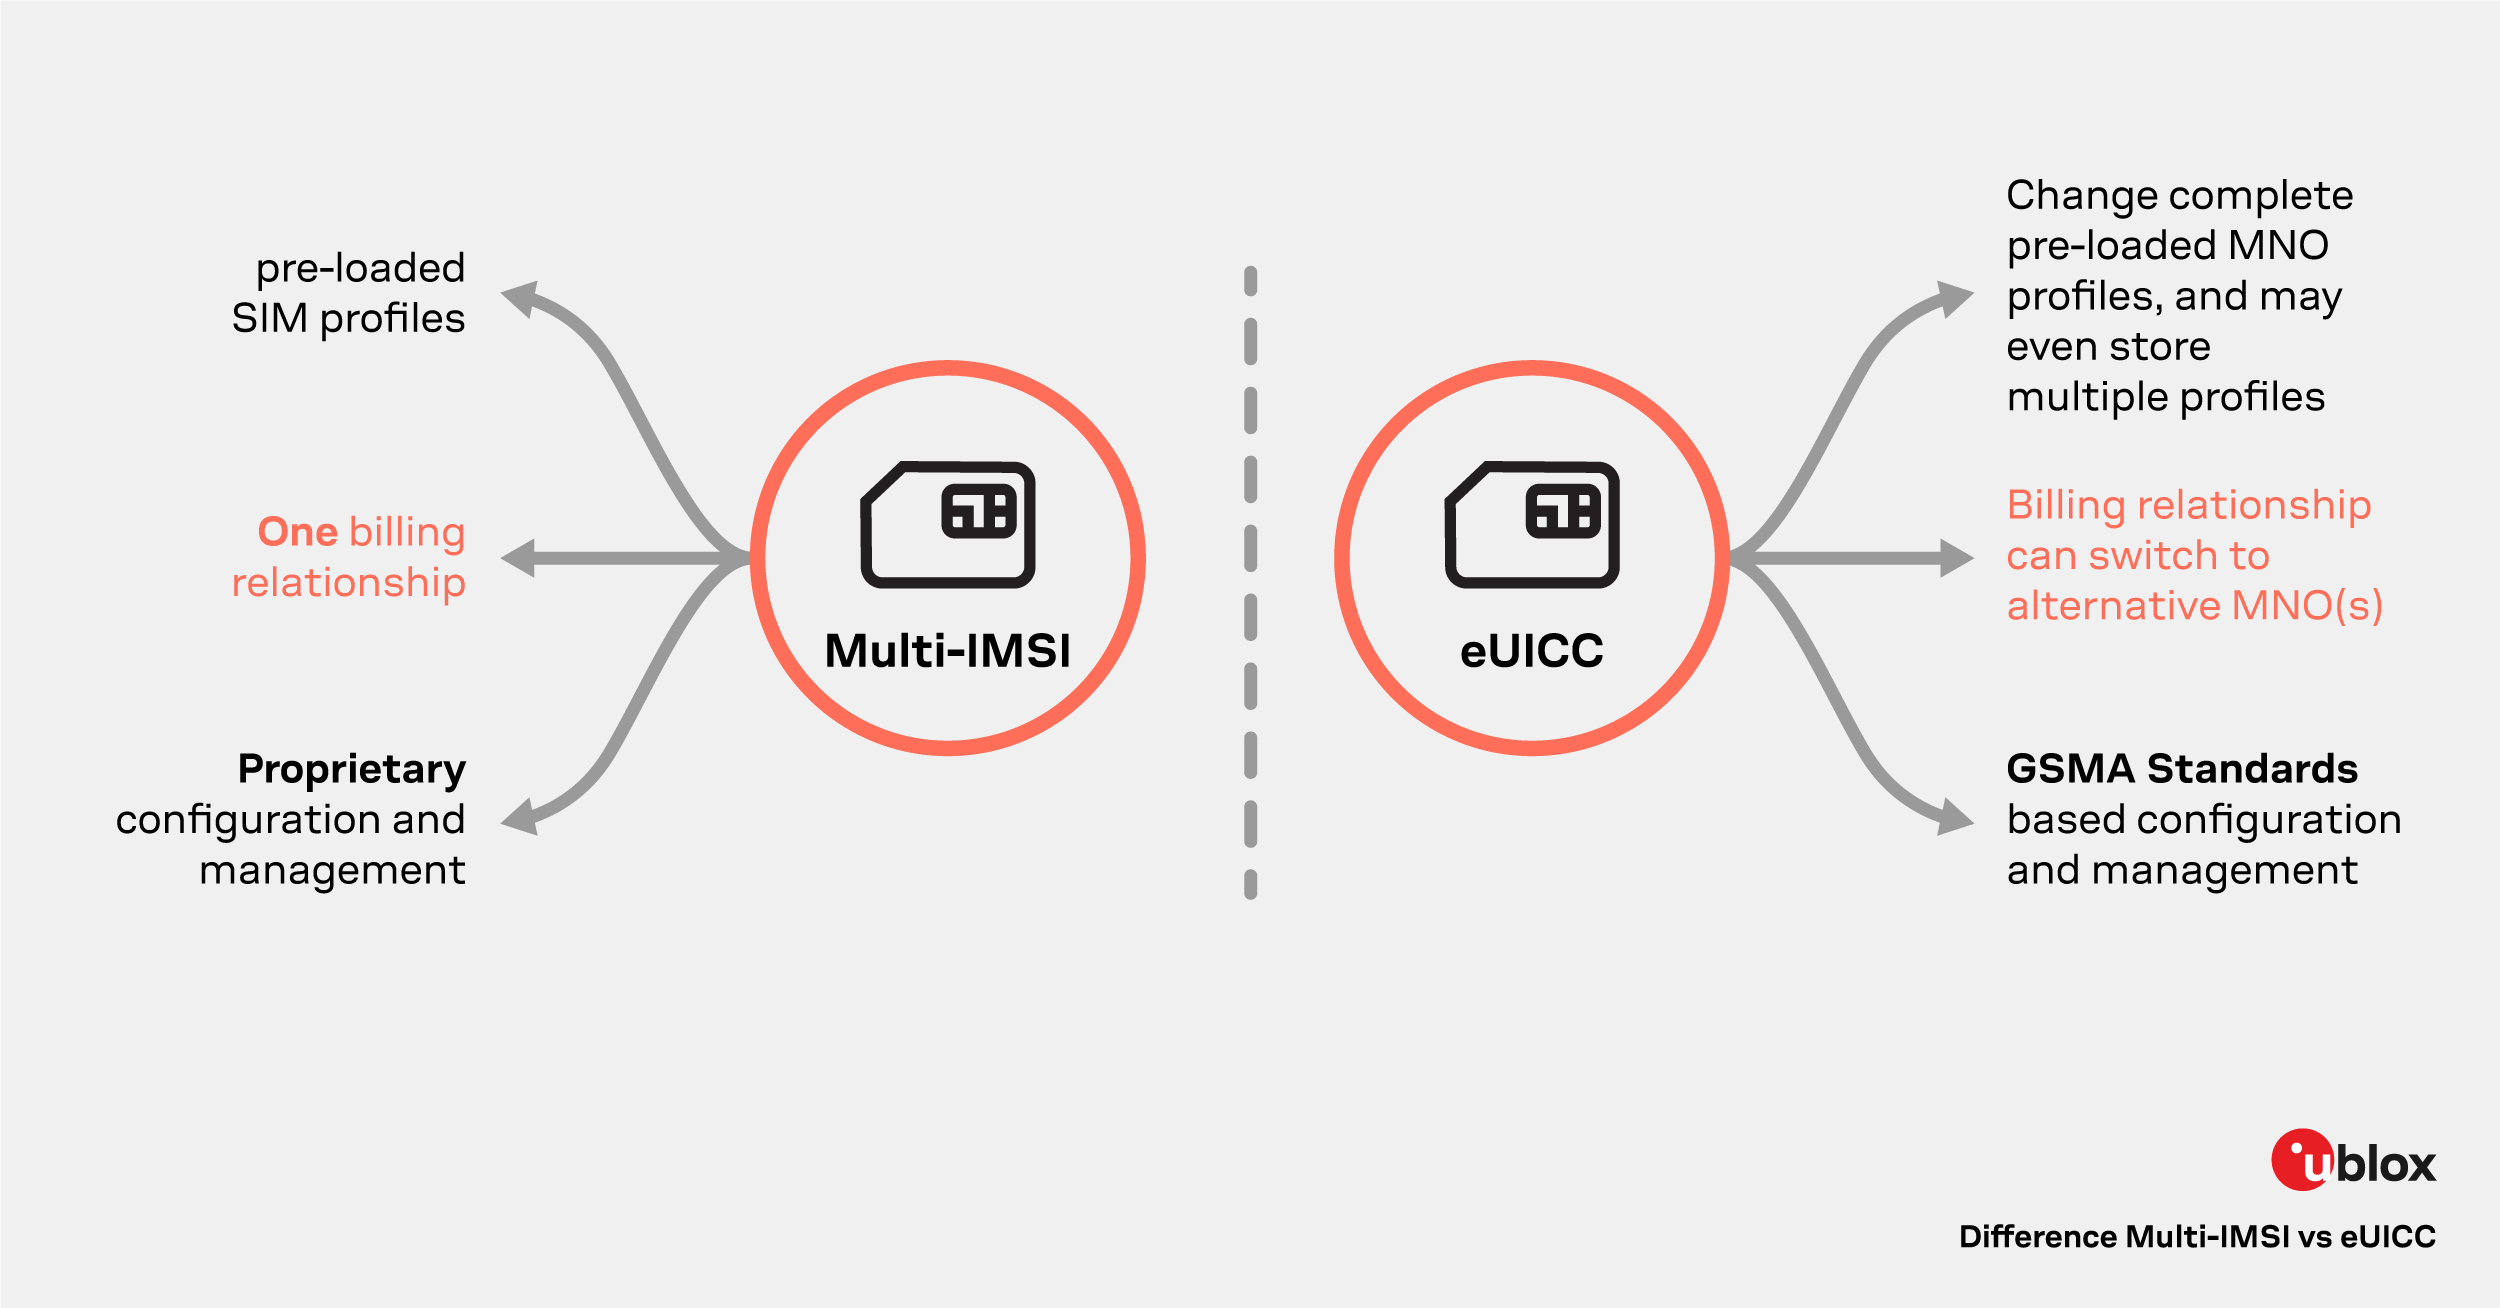 iSIM visualization showing difference between Multi-IMSI card and eUICC card